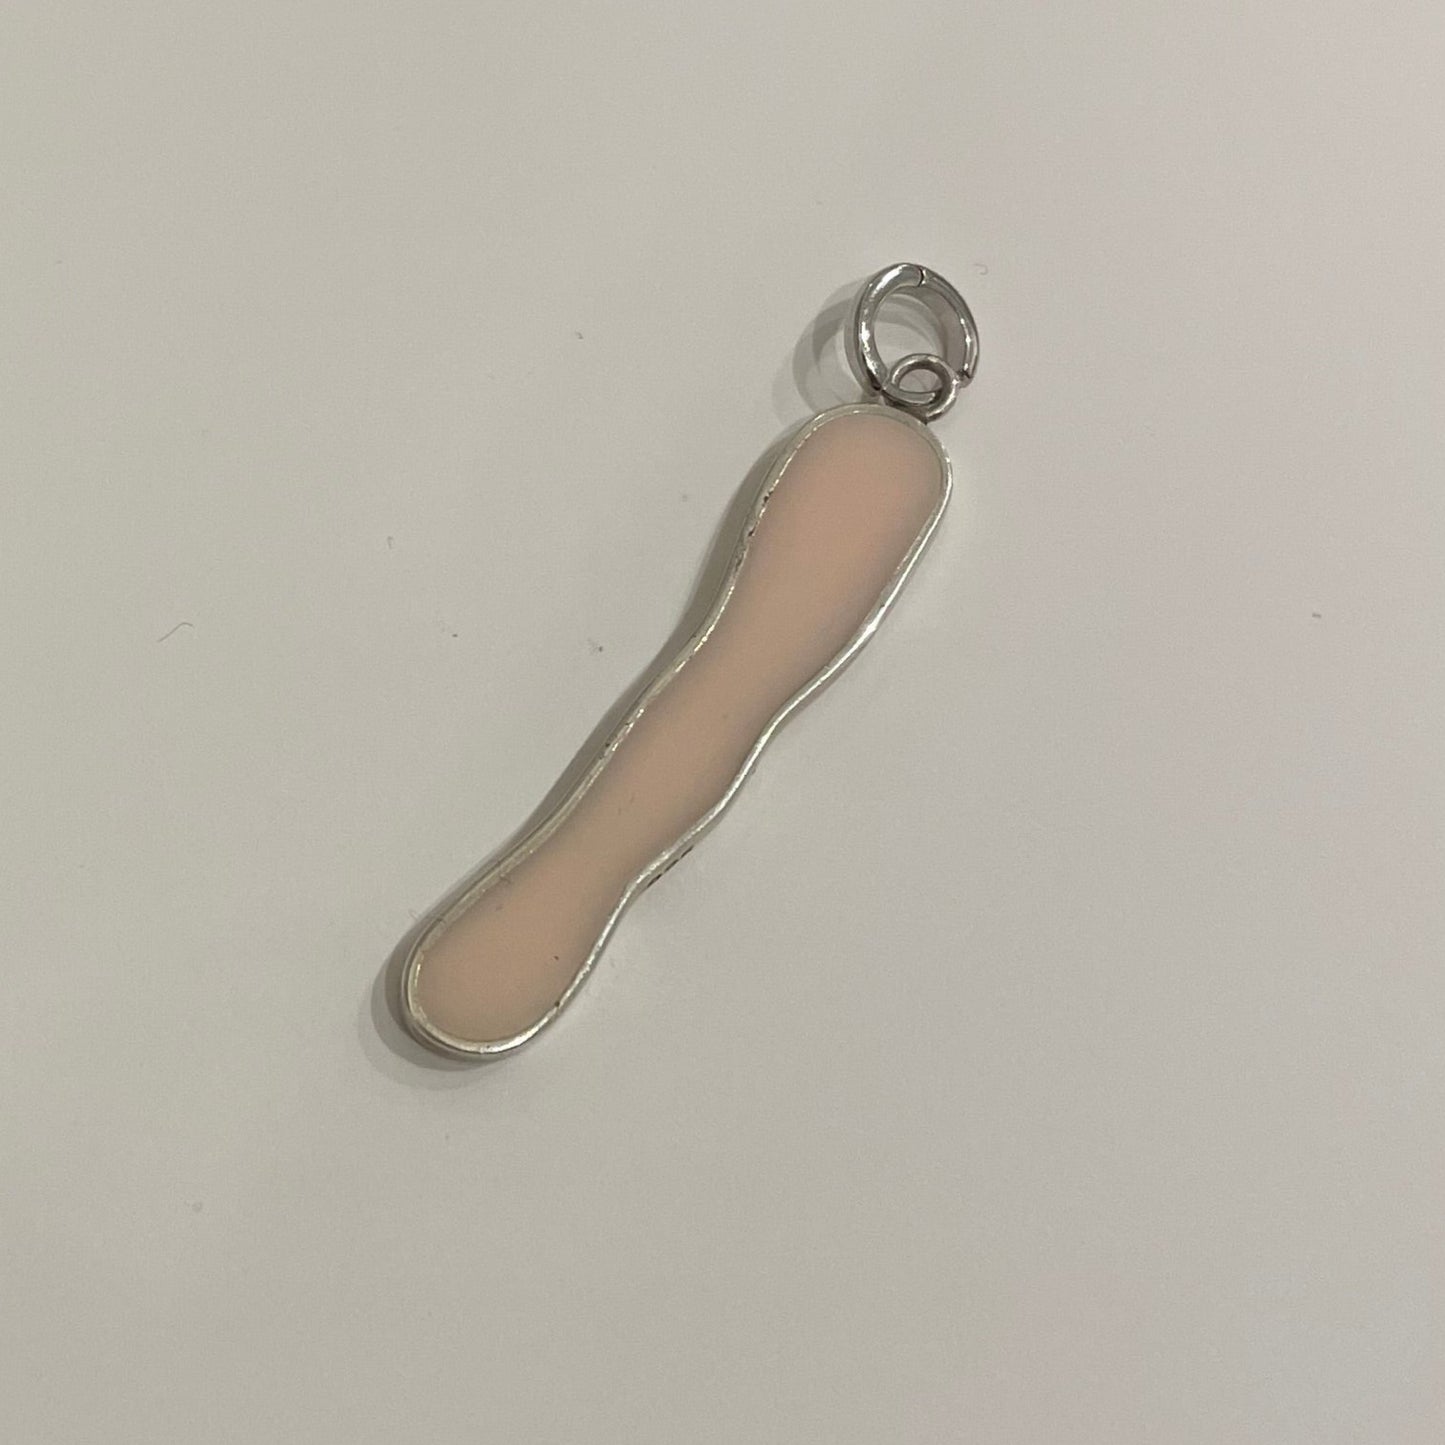 Long irregular shape clip-on charm made by silver and filed by light pink epoxy resin.